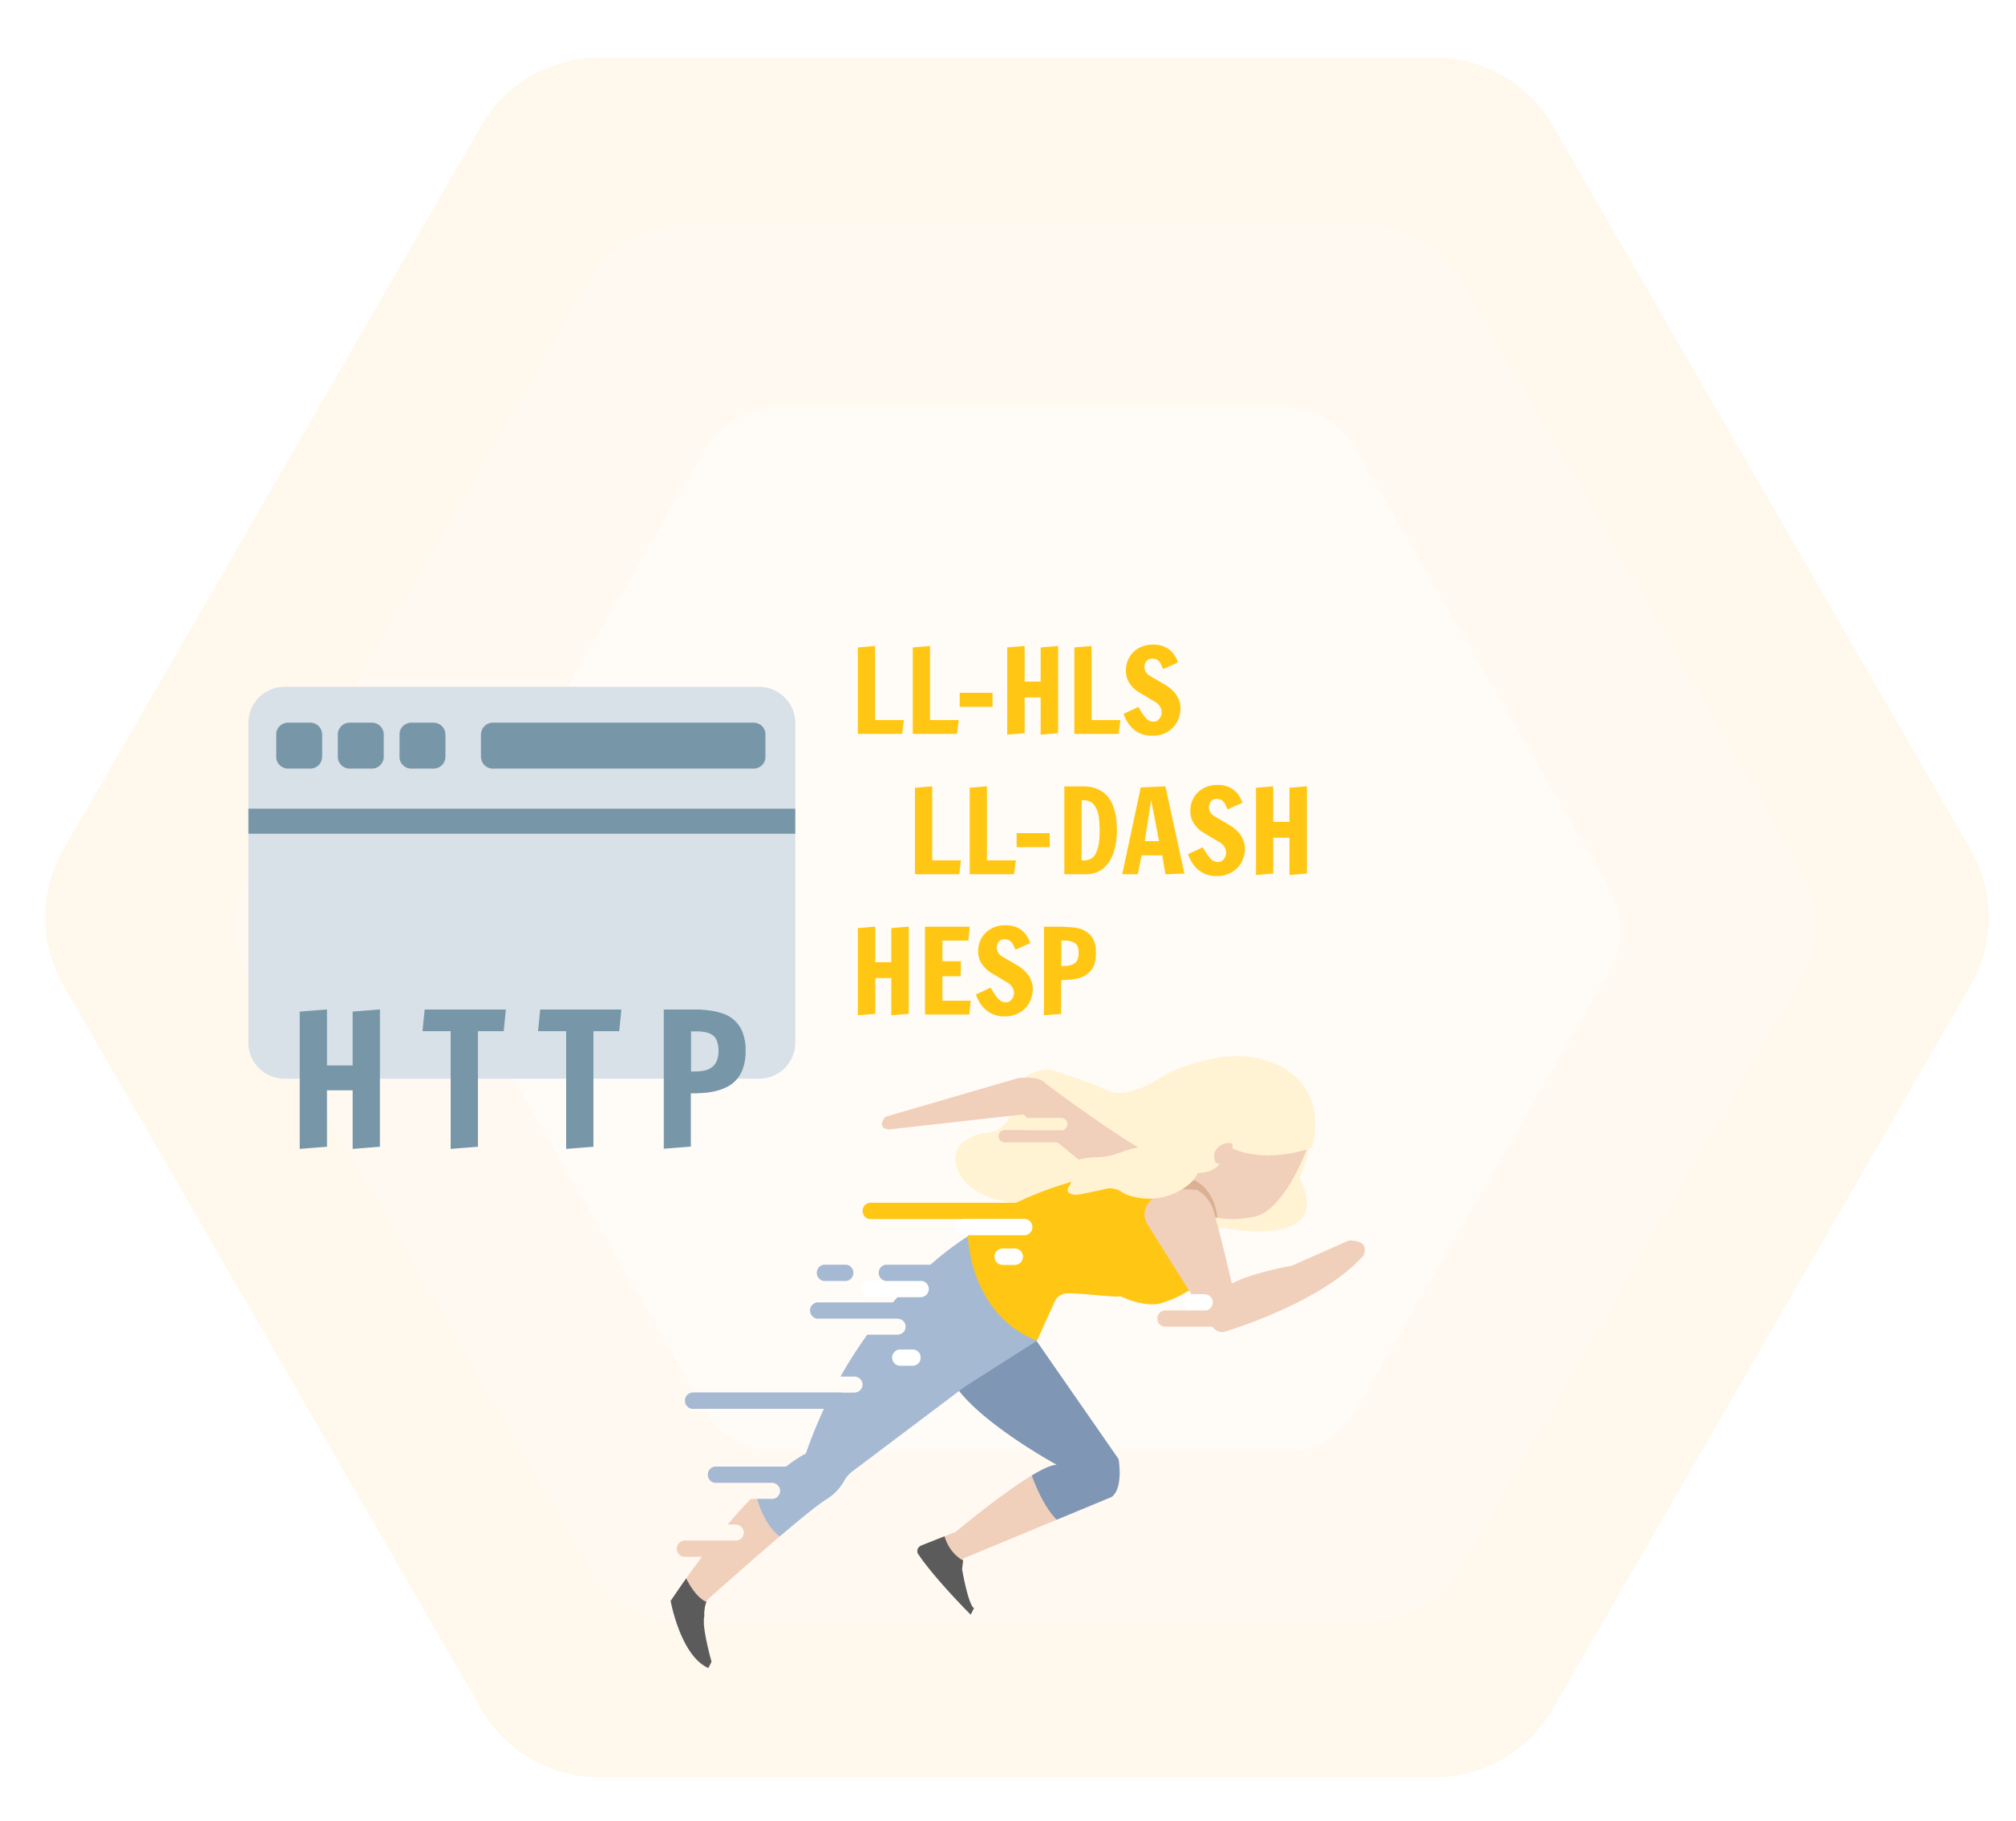 21Q3_Low Latency Check-up- LL-HLS, LL-DASH and HESP Updates - Web Header-01